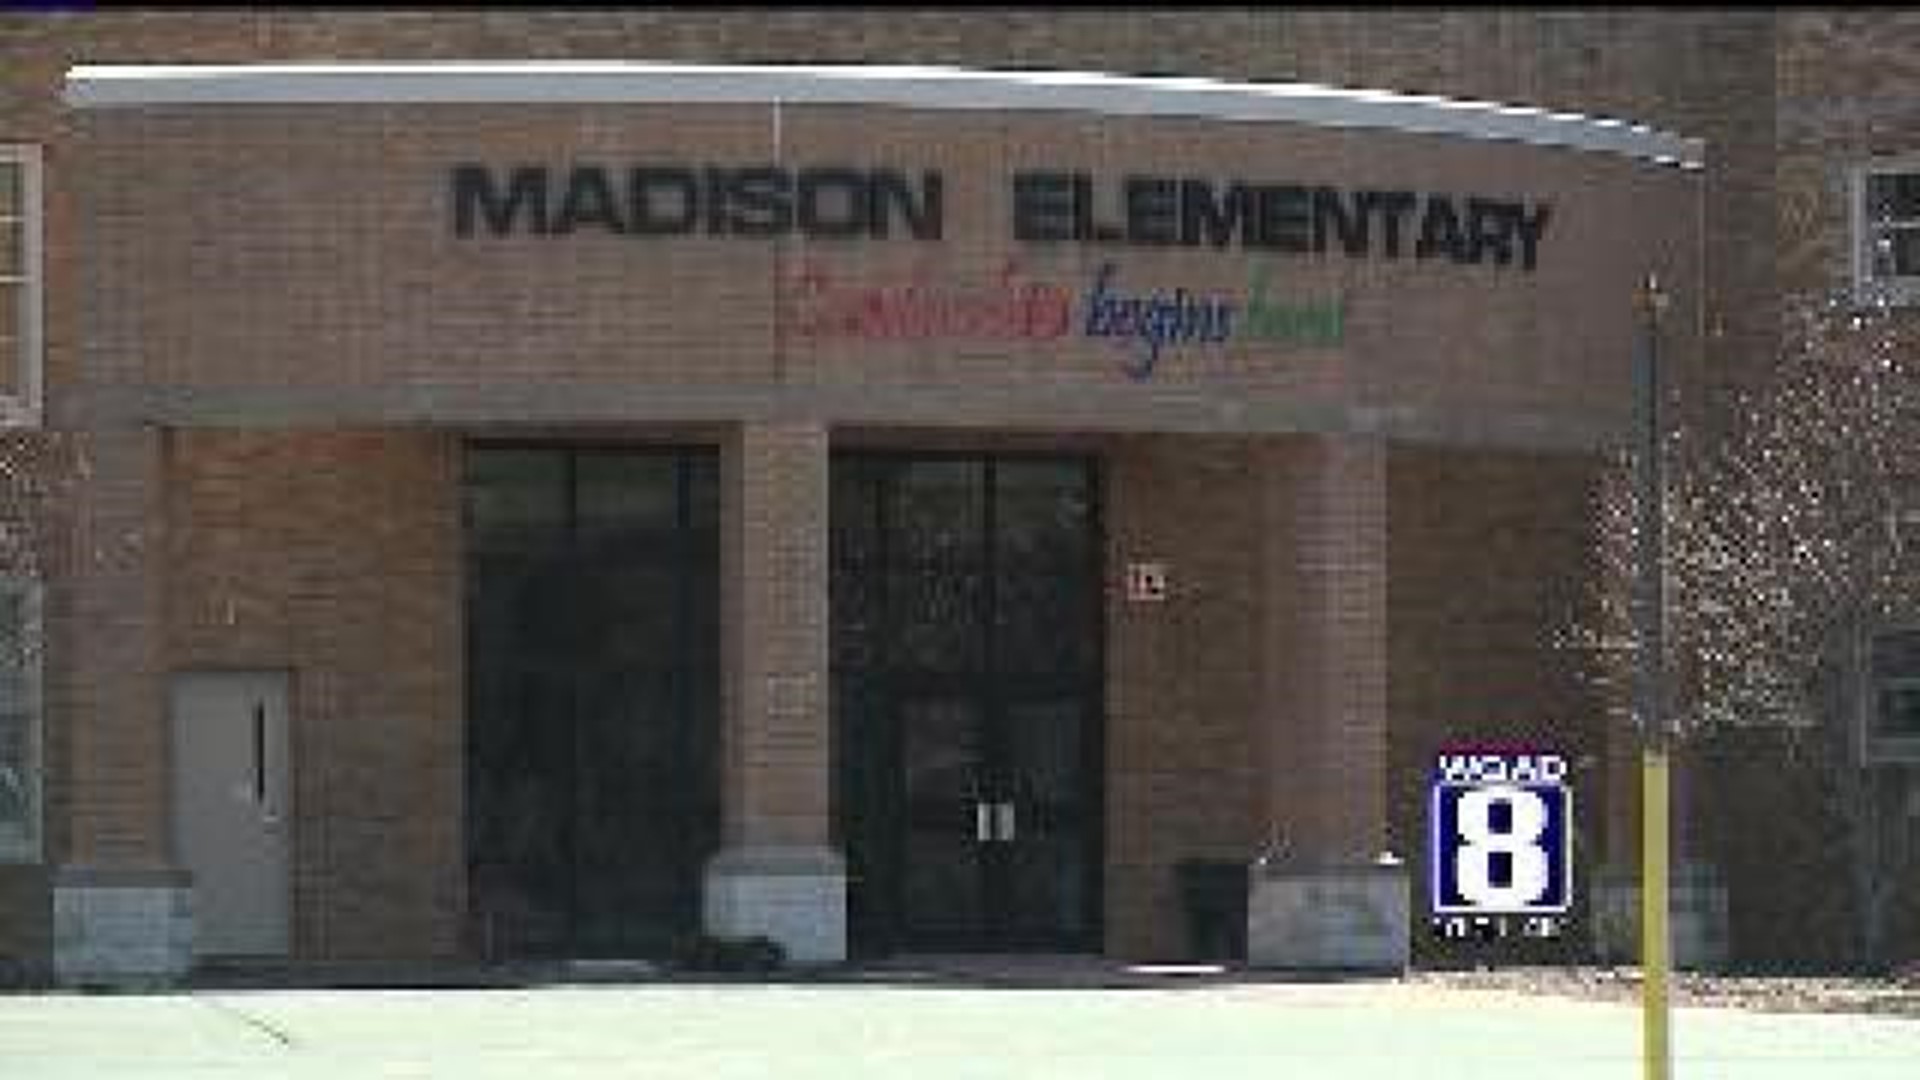 Iowa Assessment tests altered at Davenport elementary school